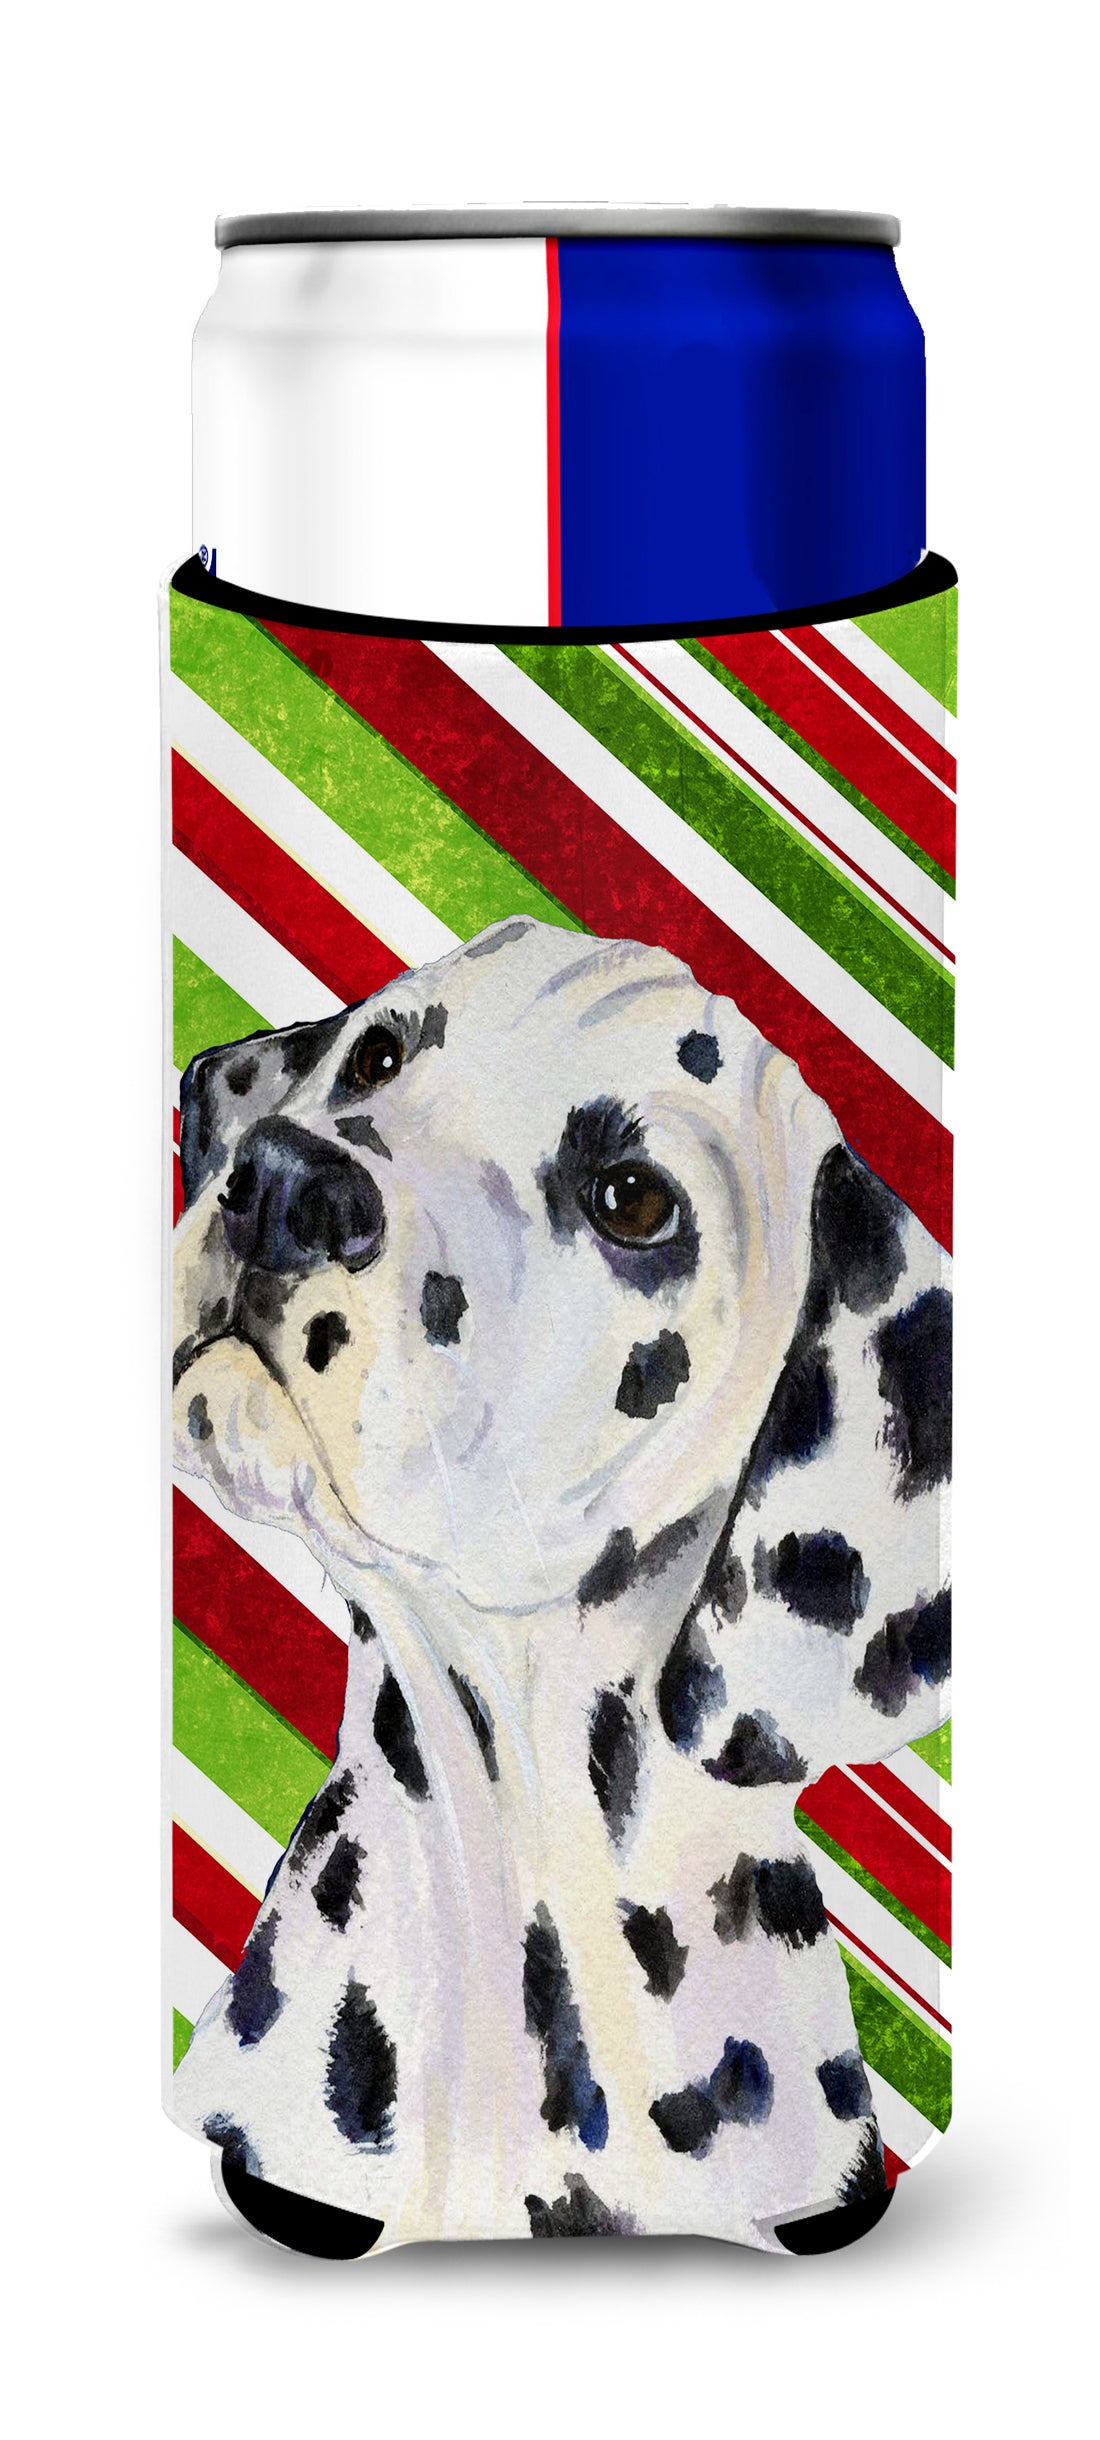 Dalmatian Candy Cane Holiday Christmas Ultra Beverage Insulators for slim cans SS4561MUK